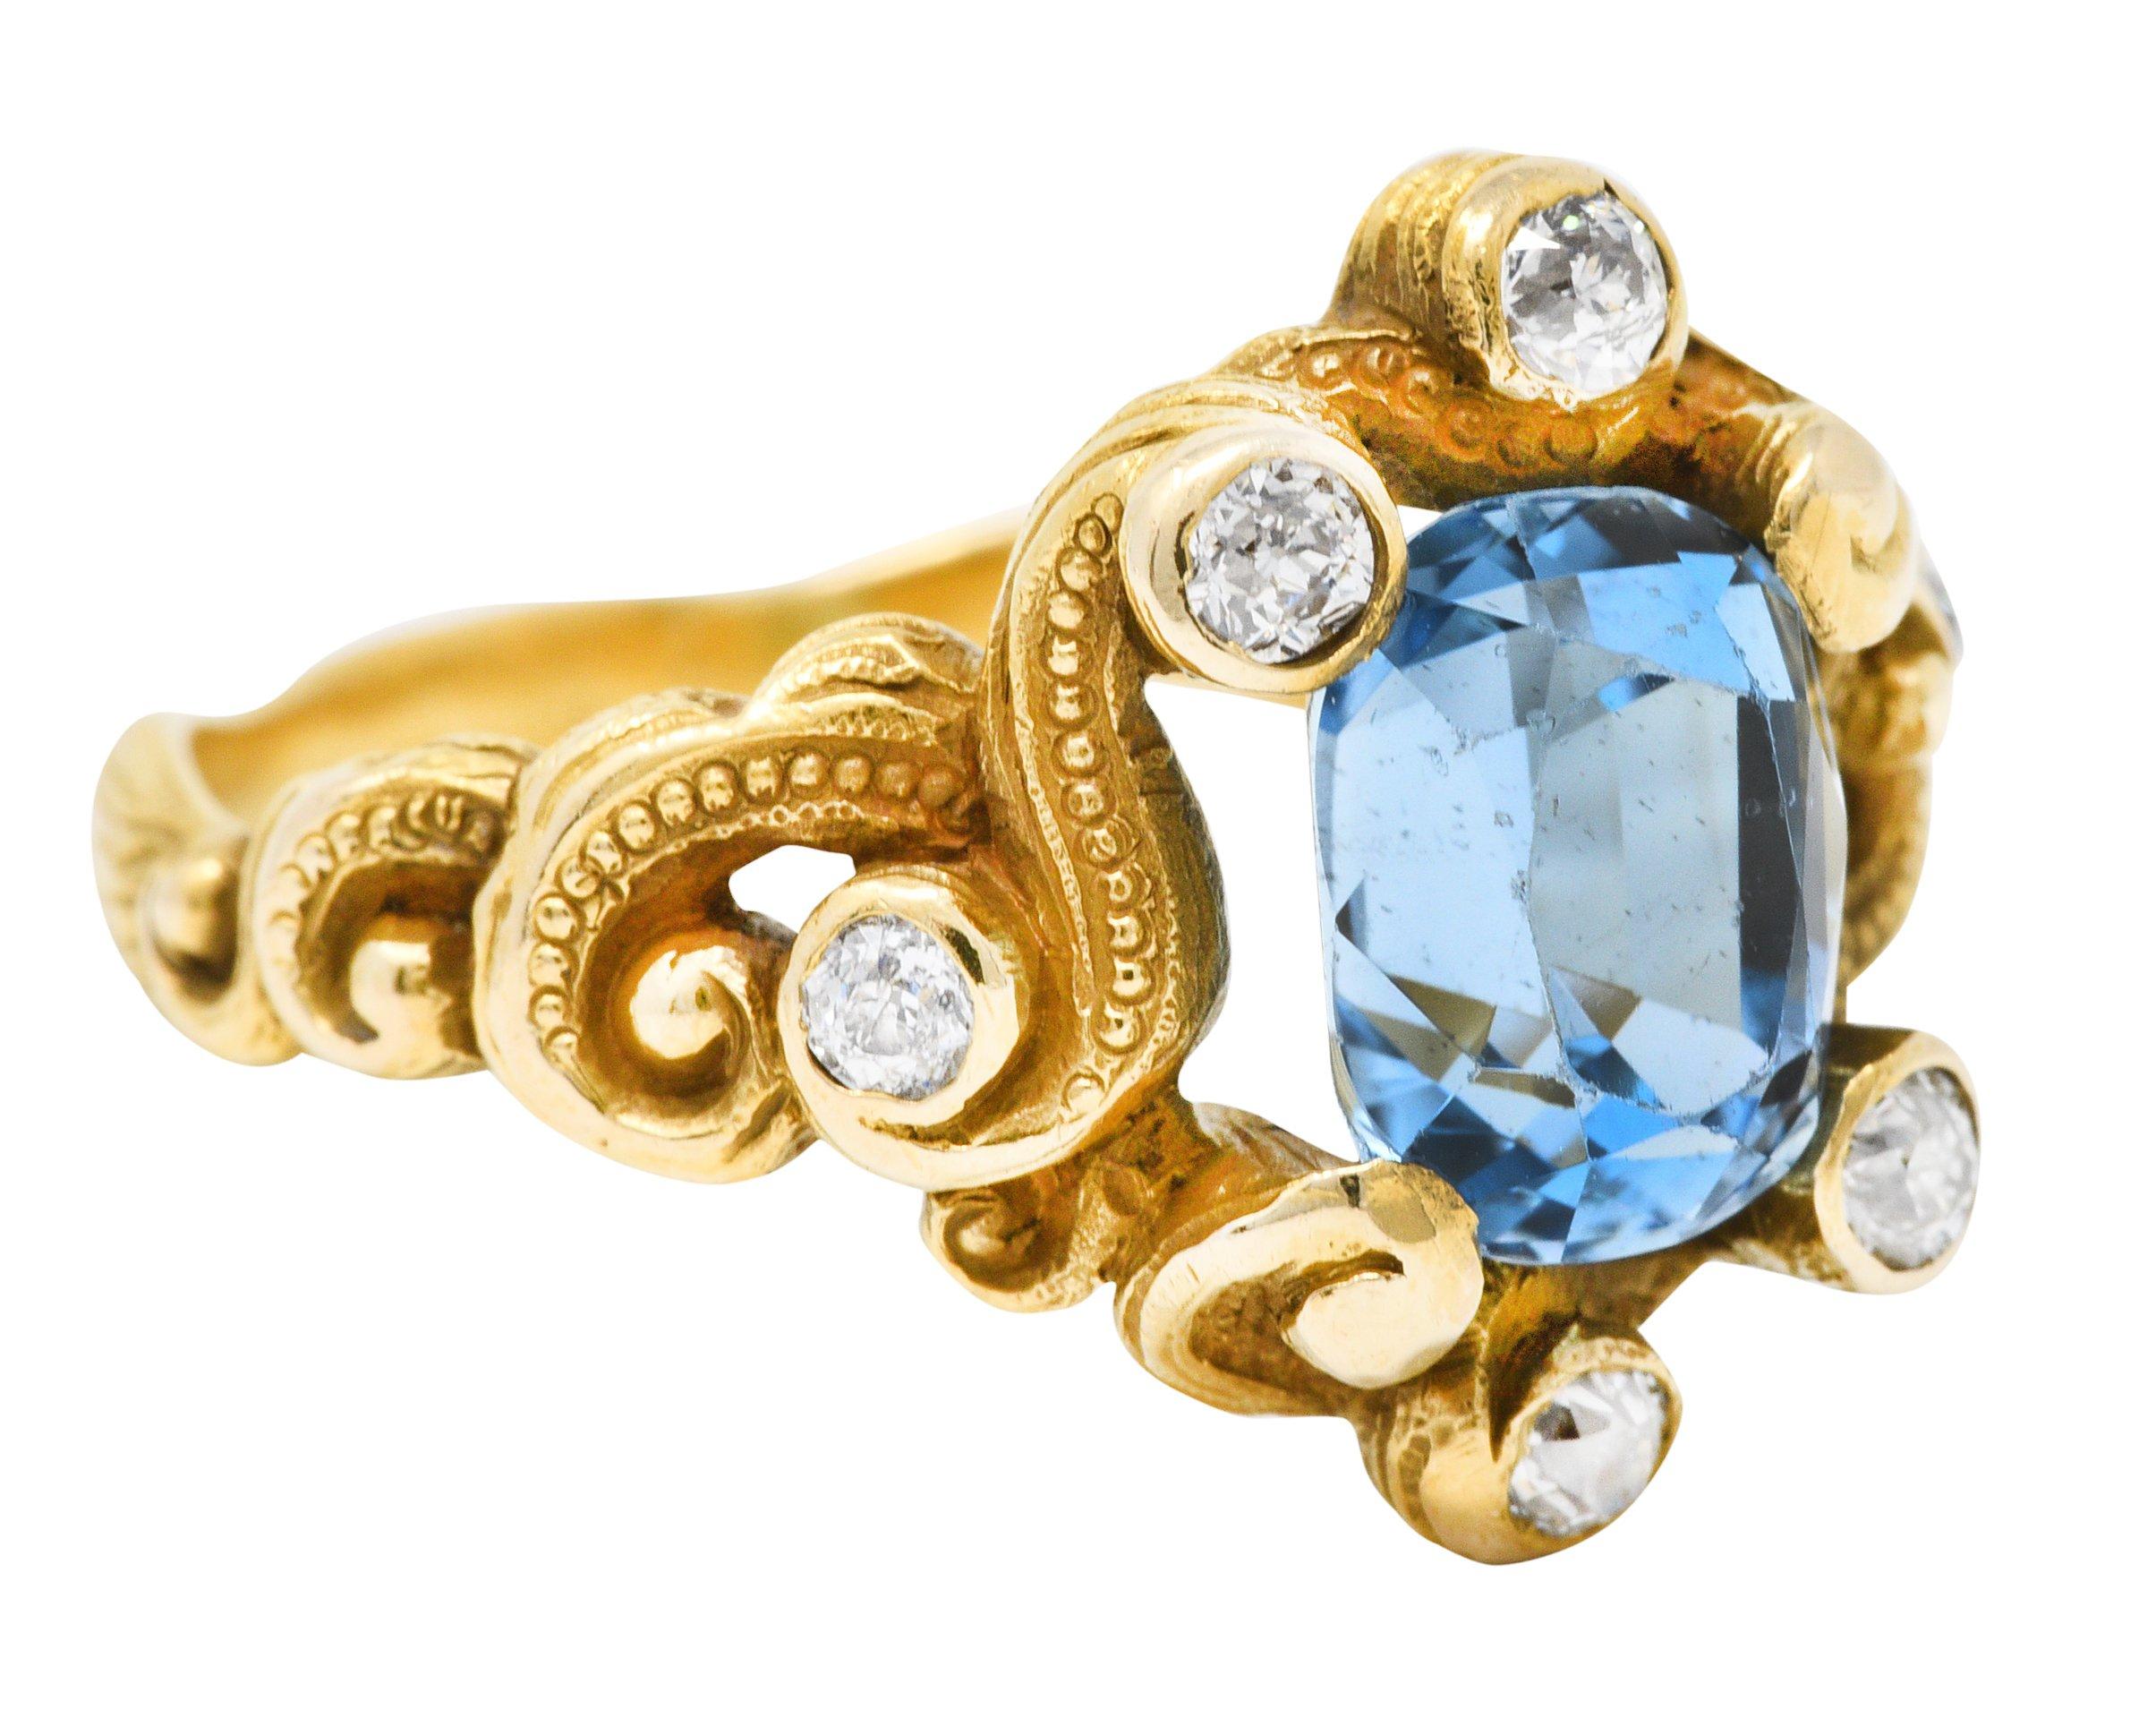 Band ring is designed as scrolling whiplash tendrils accented by gold bead detail

Centering a rectangular cushion cut aquamarine weighing approximately 1.70 carat

Transparent with strong and uniform sky blue color

With old mine and old European